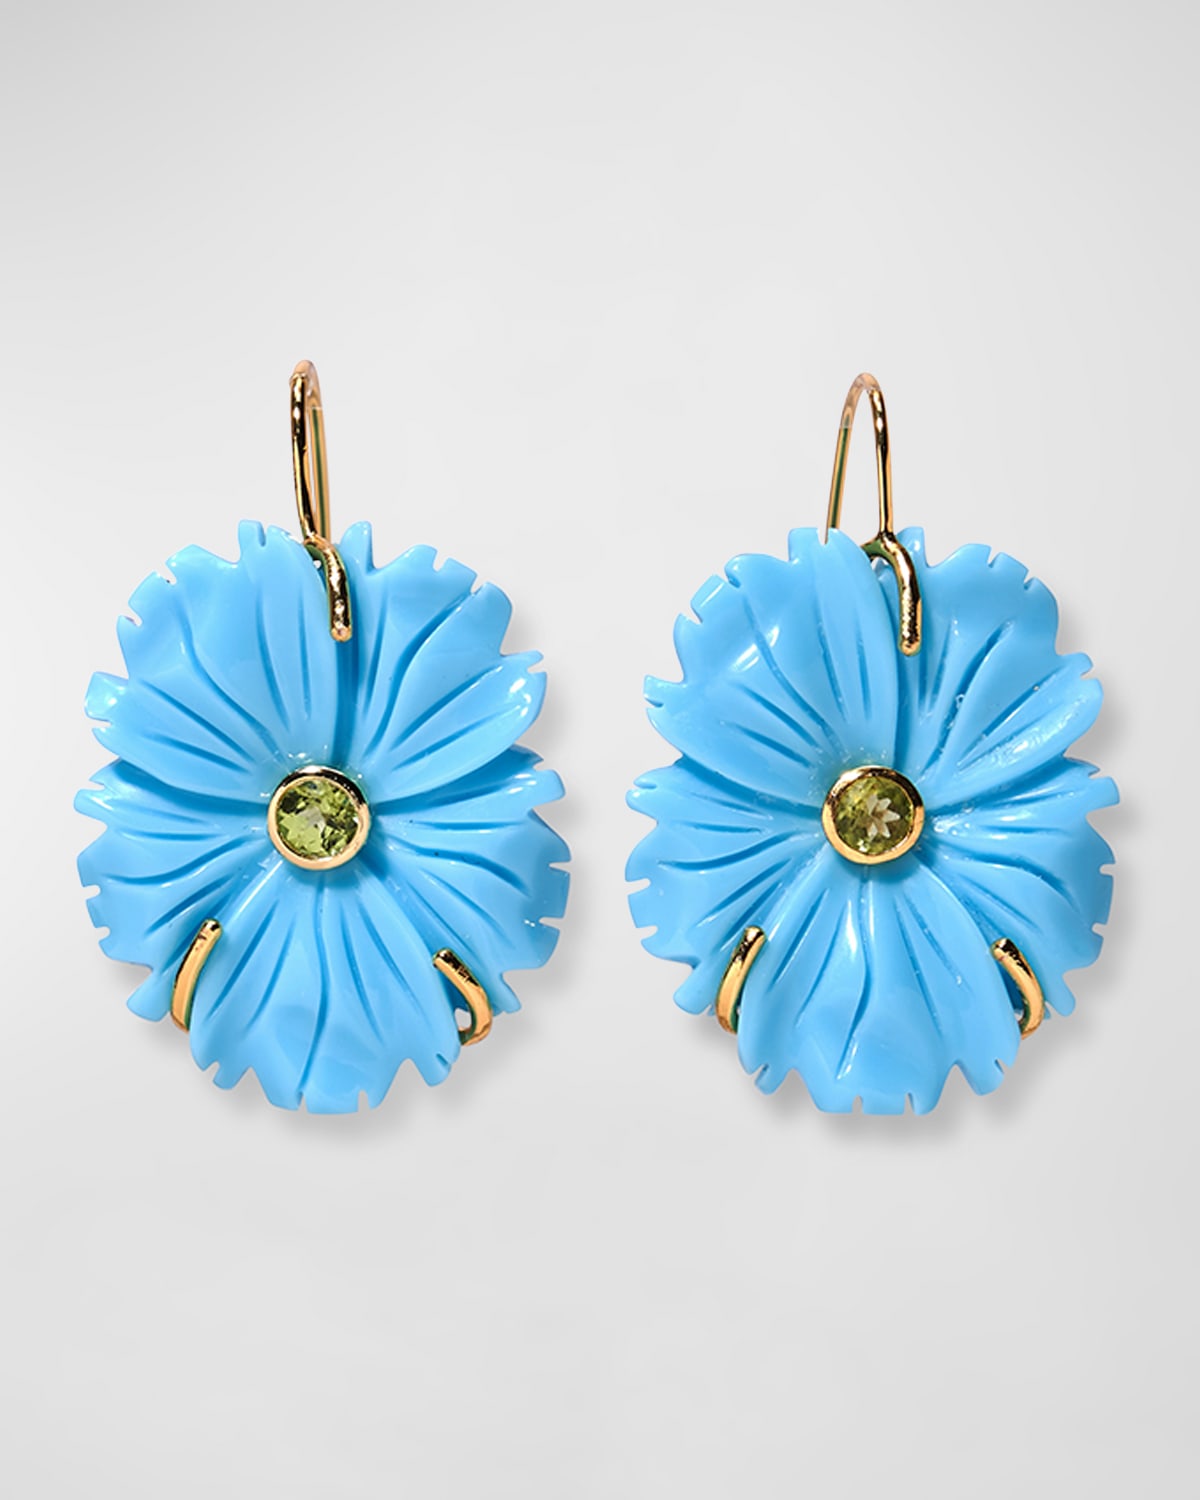 LIZZIE FORTUNATO NEW BLOOM 24K GOLD PLATED CERULEAN PERIFOT TURQUOISE DROP EARRINGS